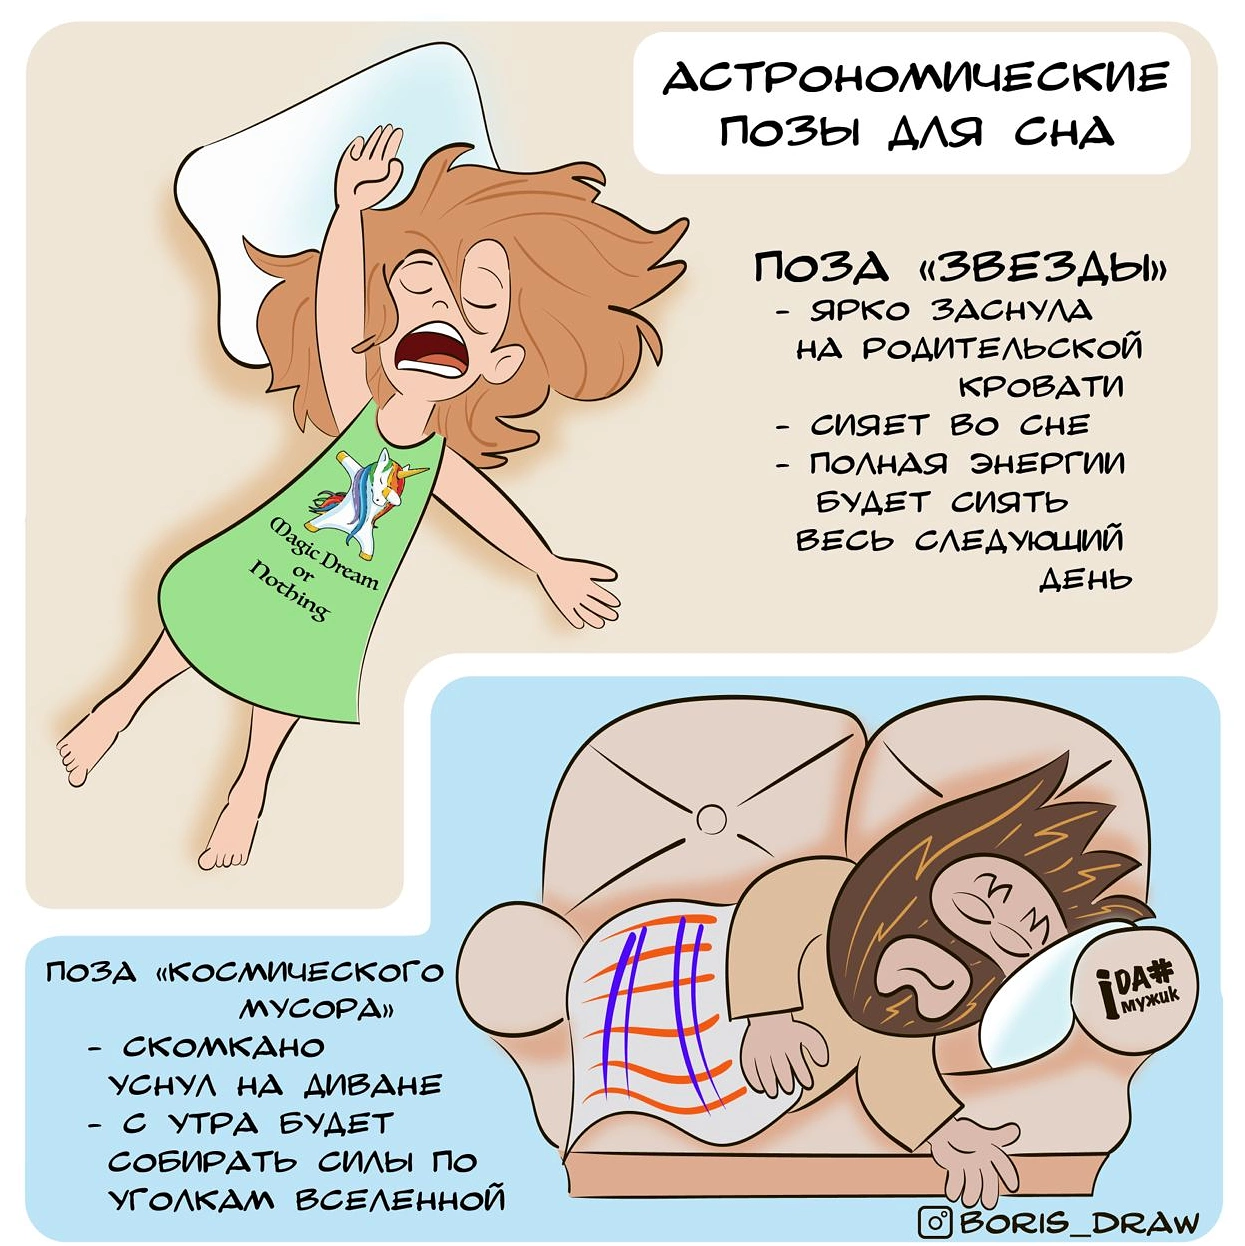 Astronomical sleeping positions - My, Dream, Comics, Astronomy, Father, Parents and children, Humor